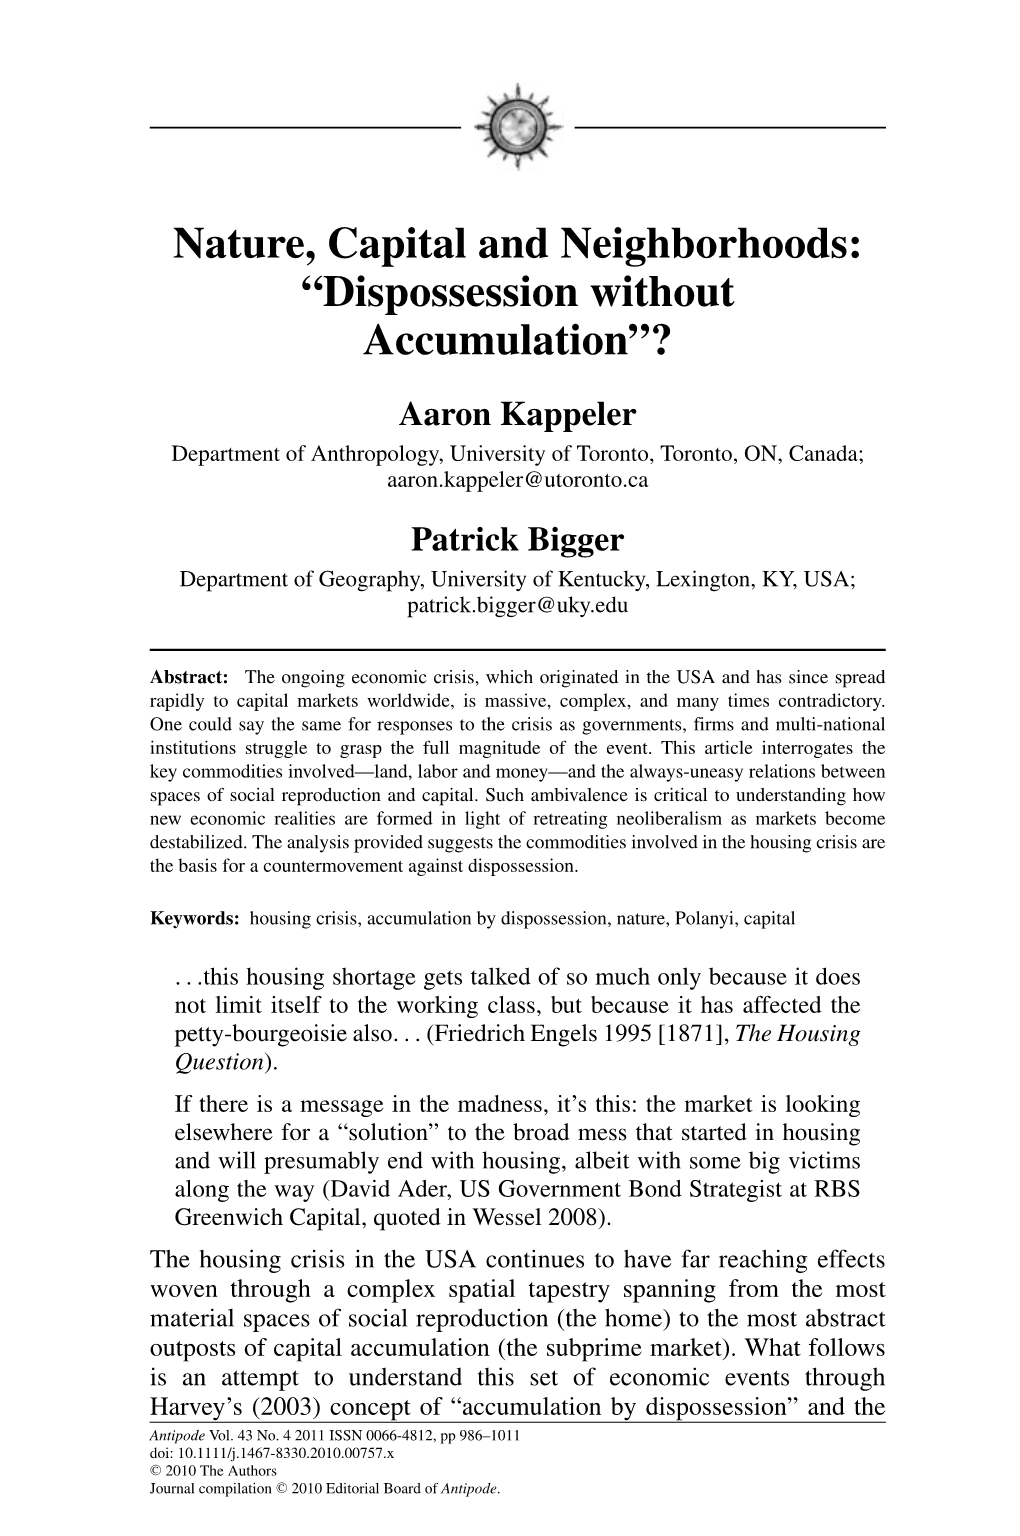 Nature, Capital and Neighborhoods: Dispossession Without Accumulation